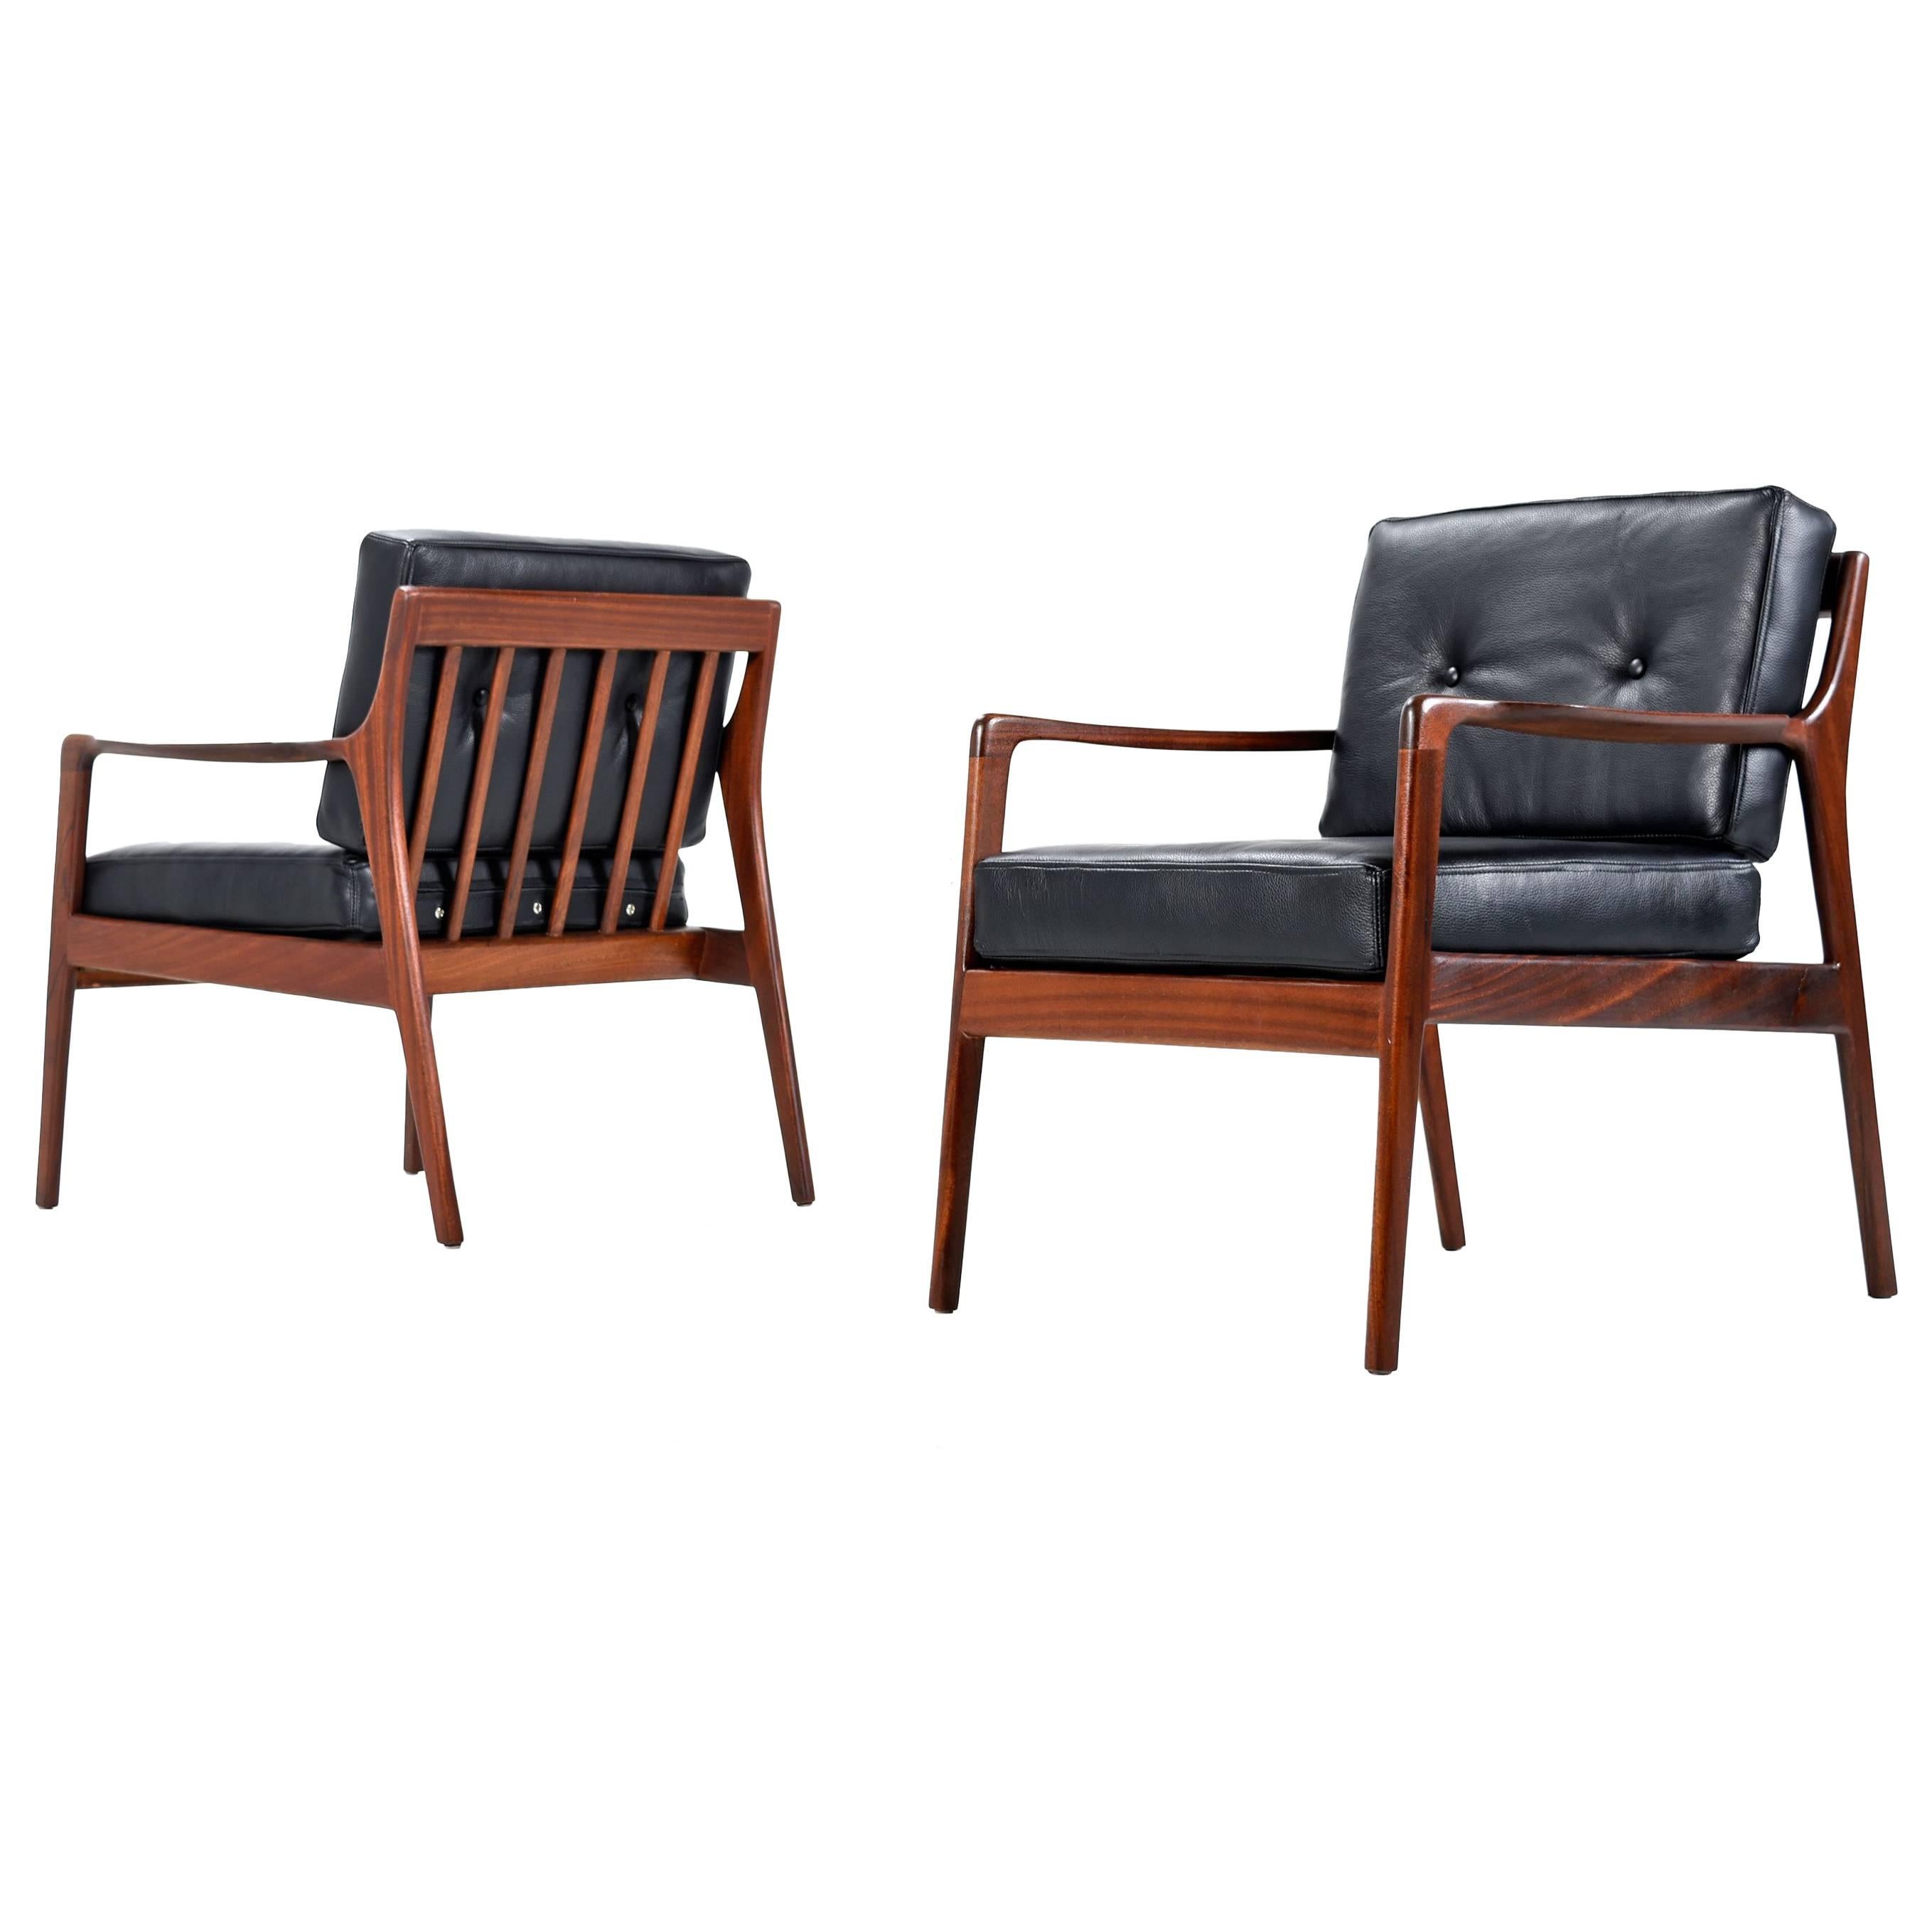 Pair of Black Leather Mid-Century Modern Mahogany Lounge Chairs